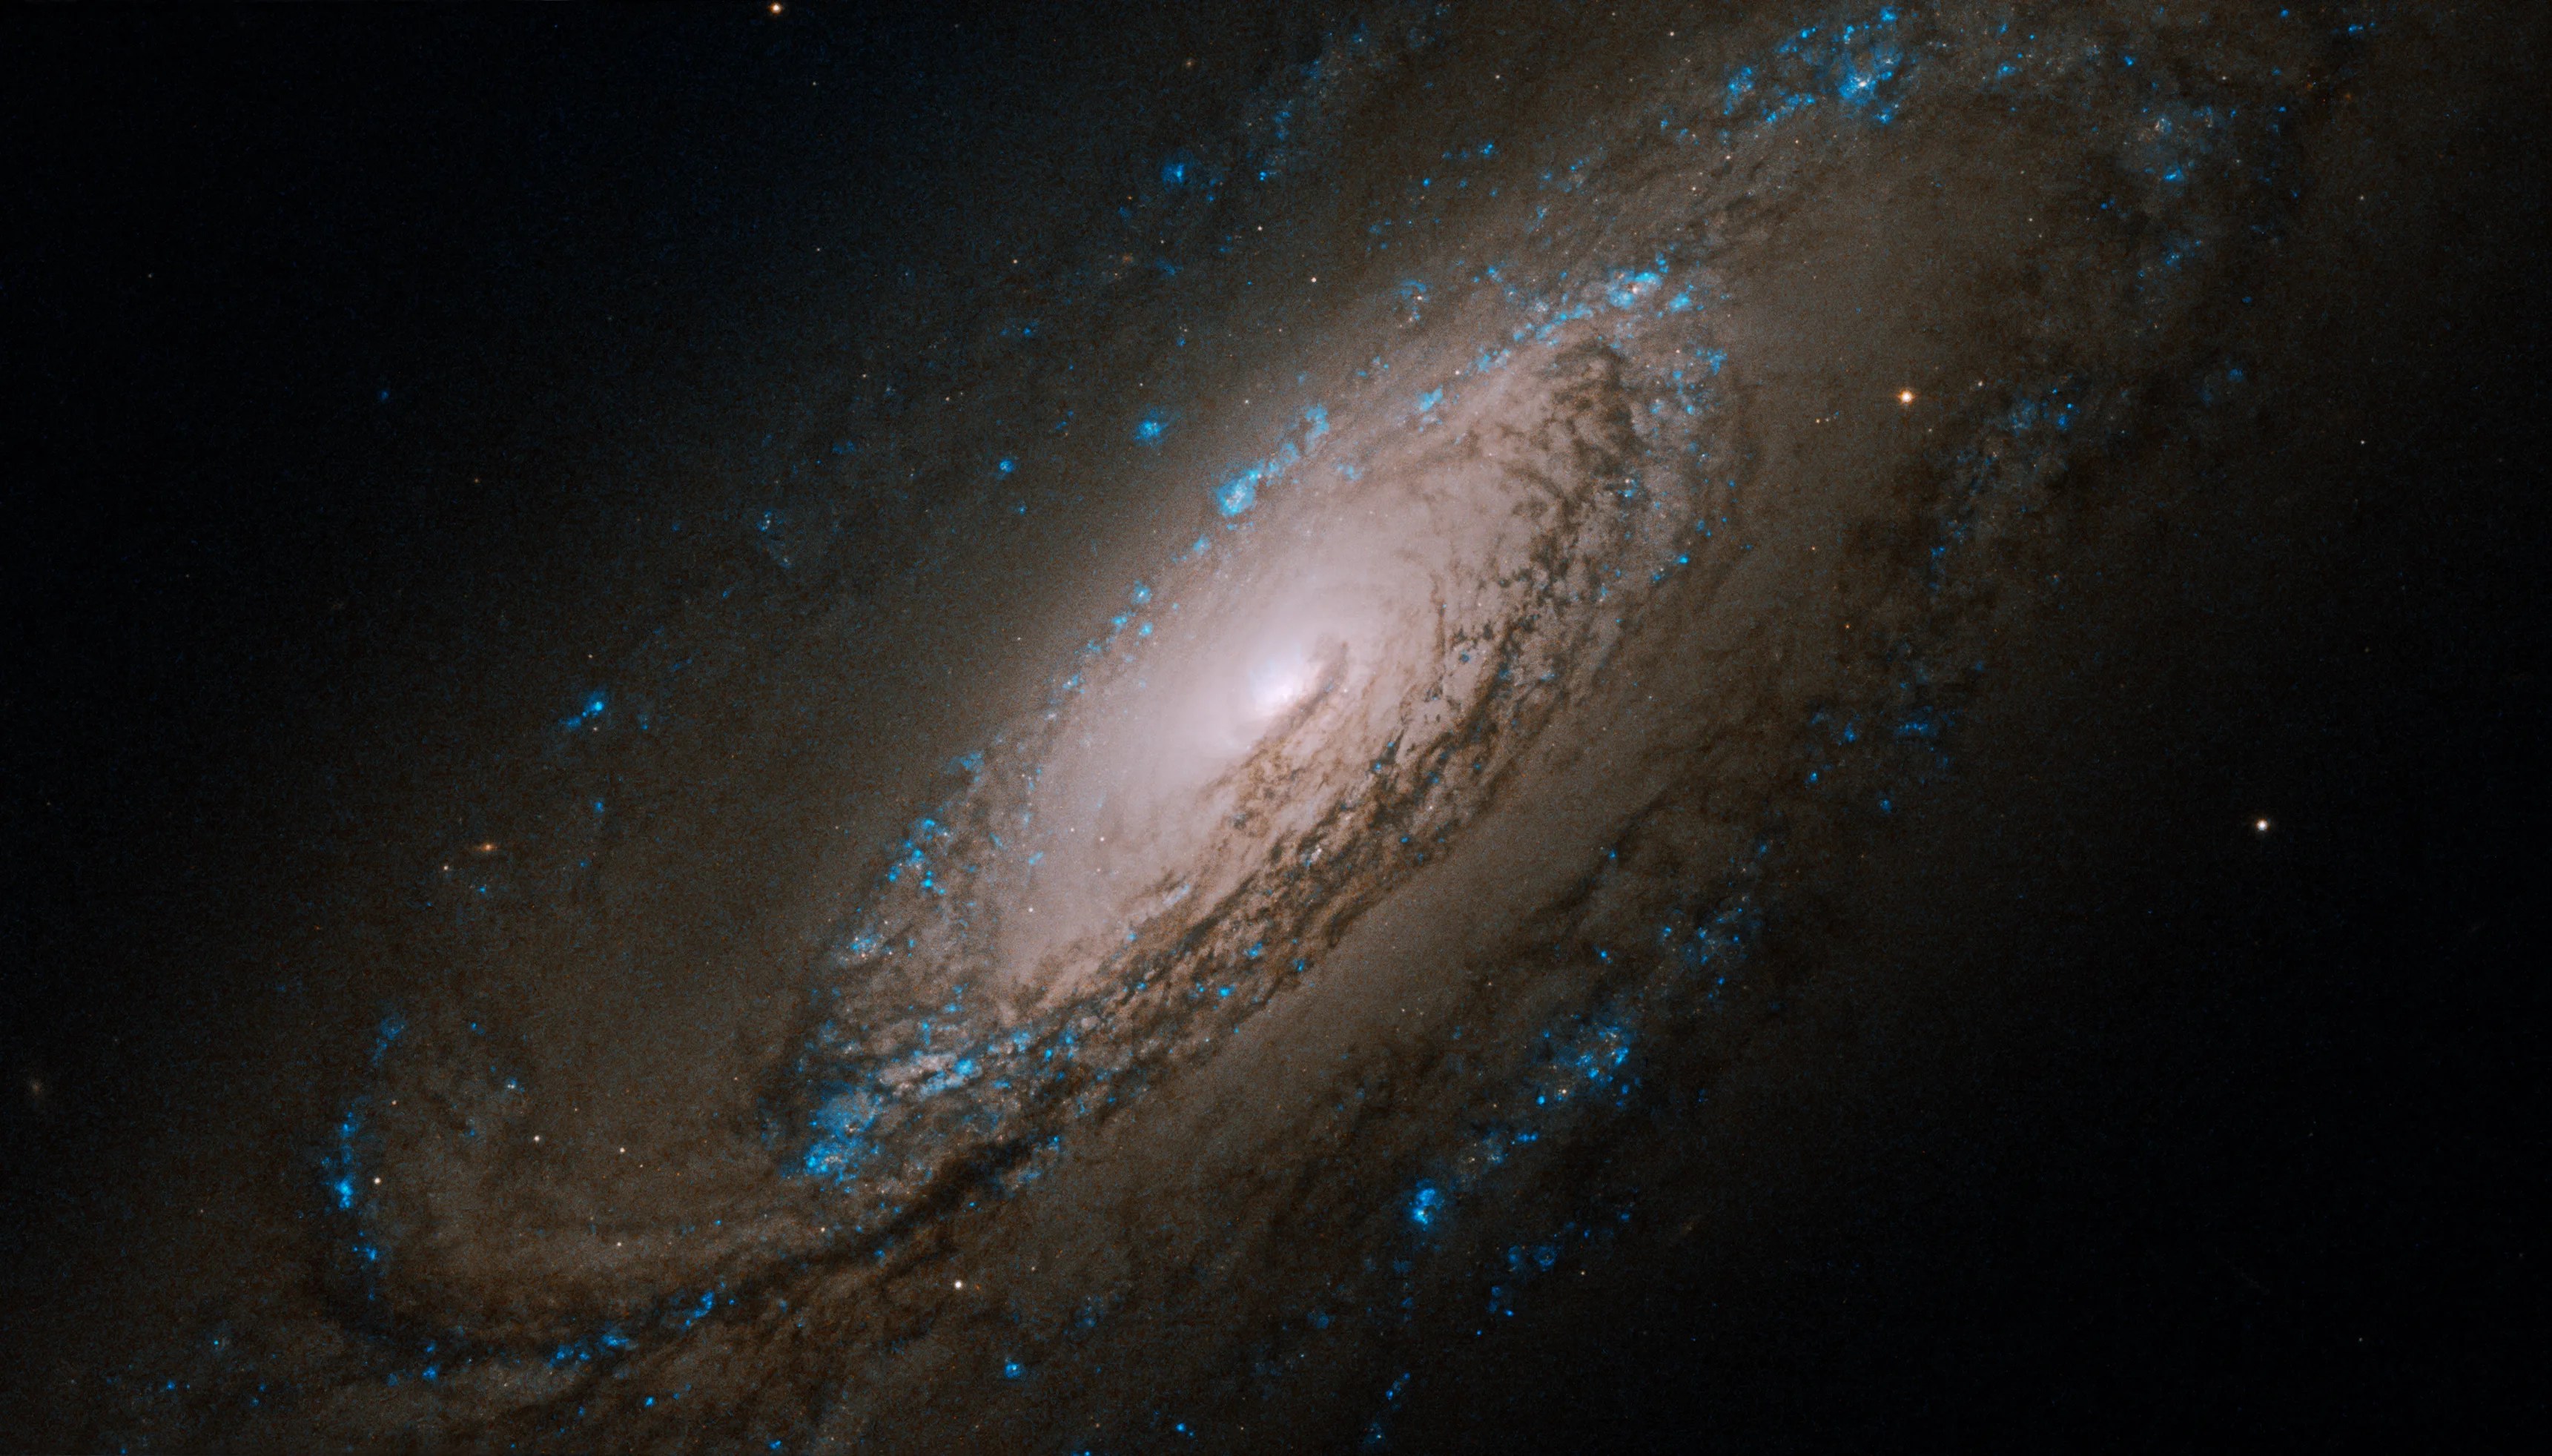 45 degree view of a spiral galaxy. Dark blue dust and gas covers up most of its millions of stars, but the core, center of the image, is bright white.